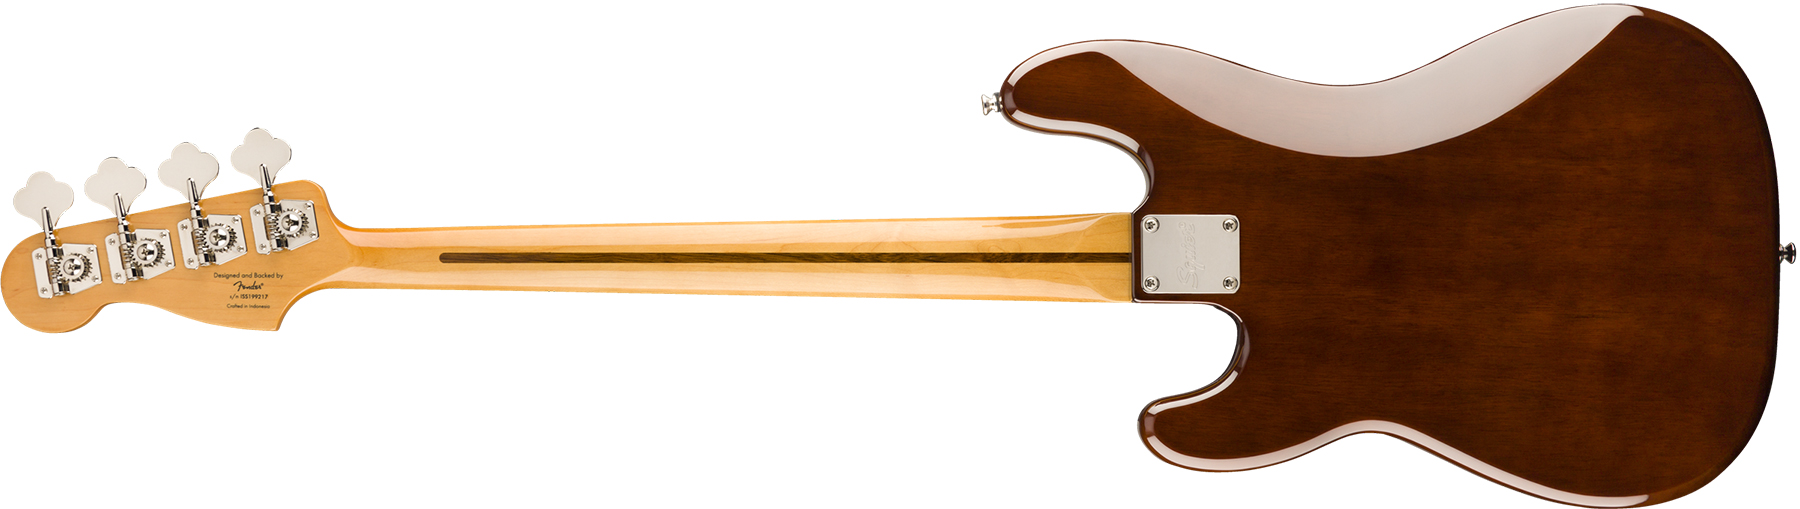 Squier Precision Bass '70s Classic Vibe 2019 Mn - Walnut - Basse Électrique Solid Body - Variation 1